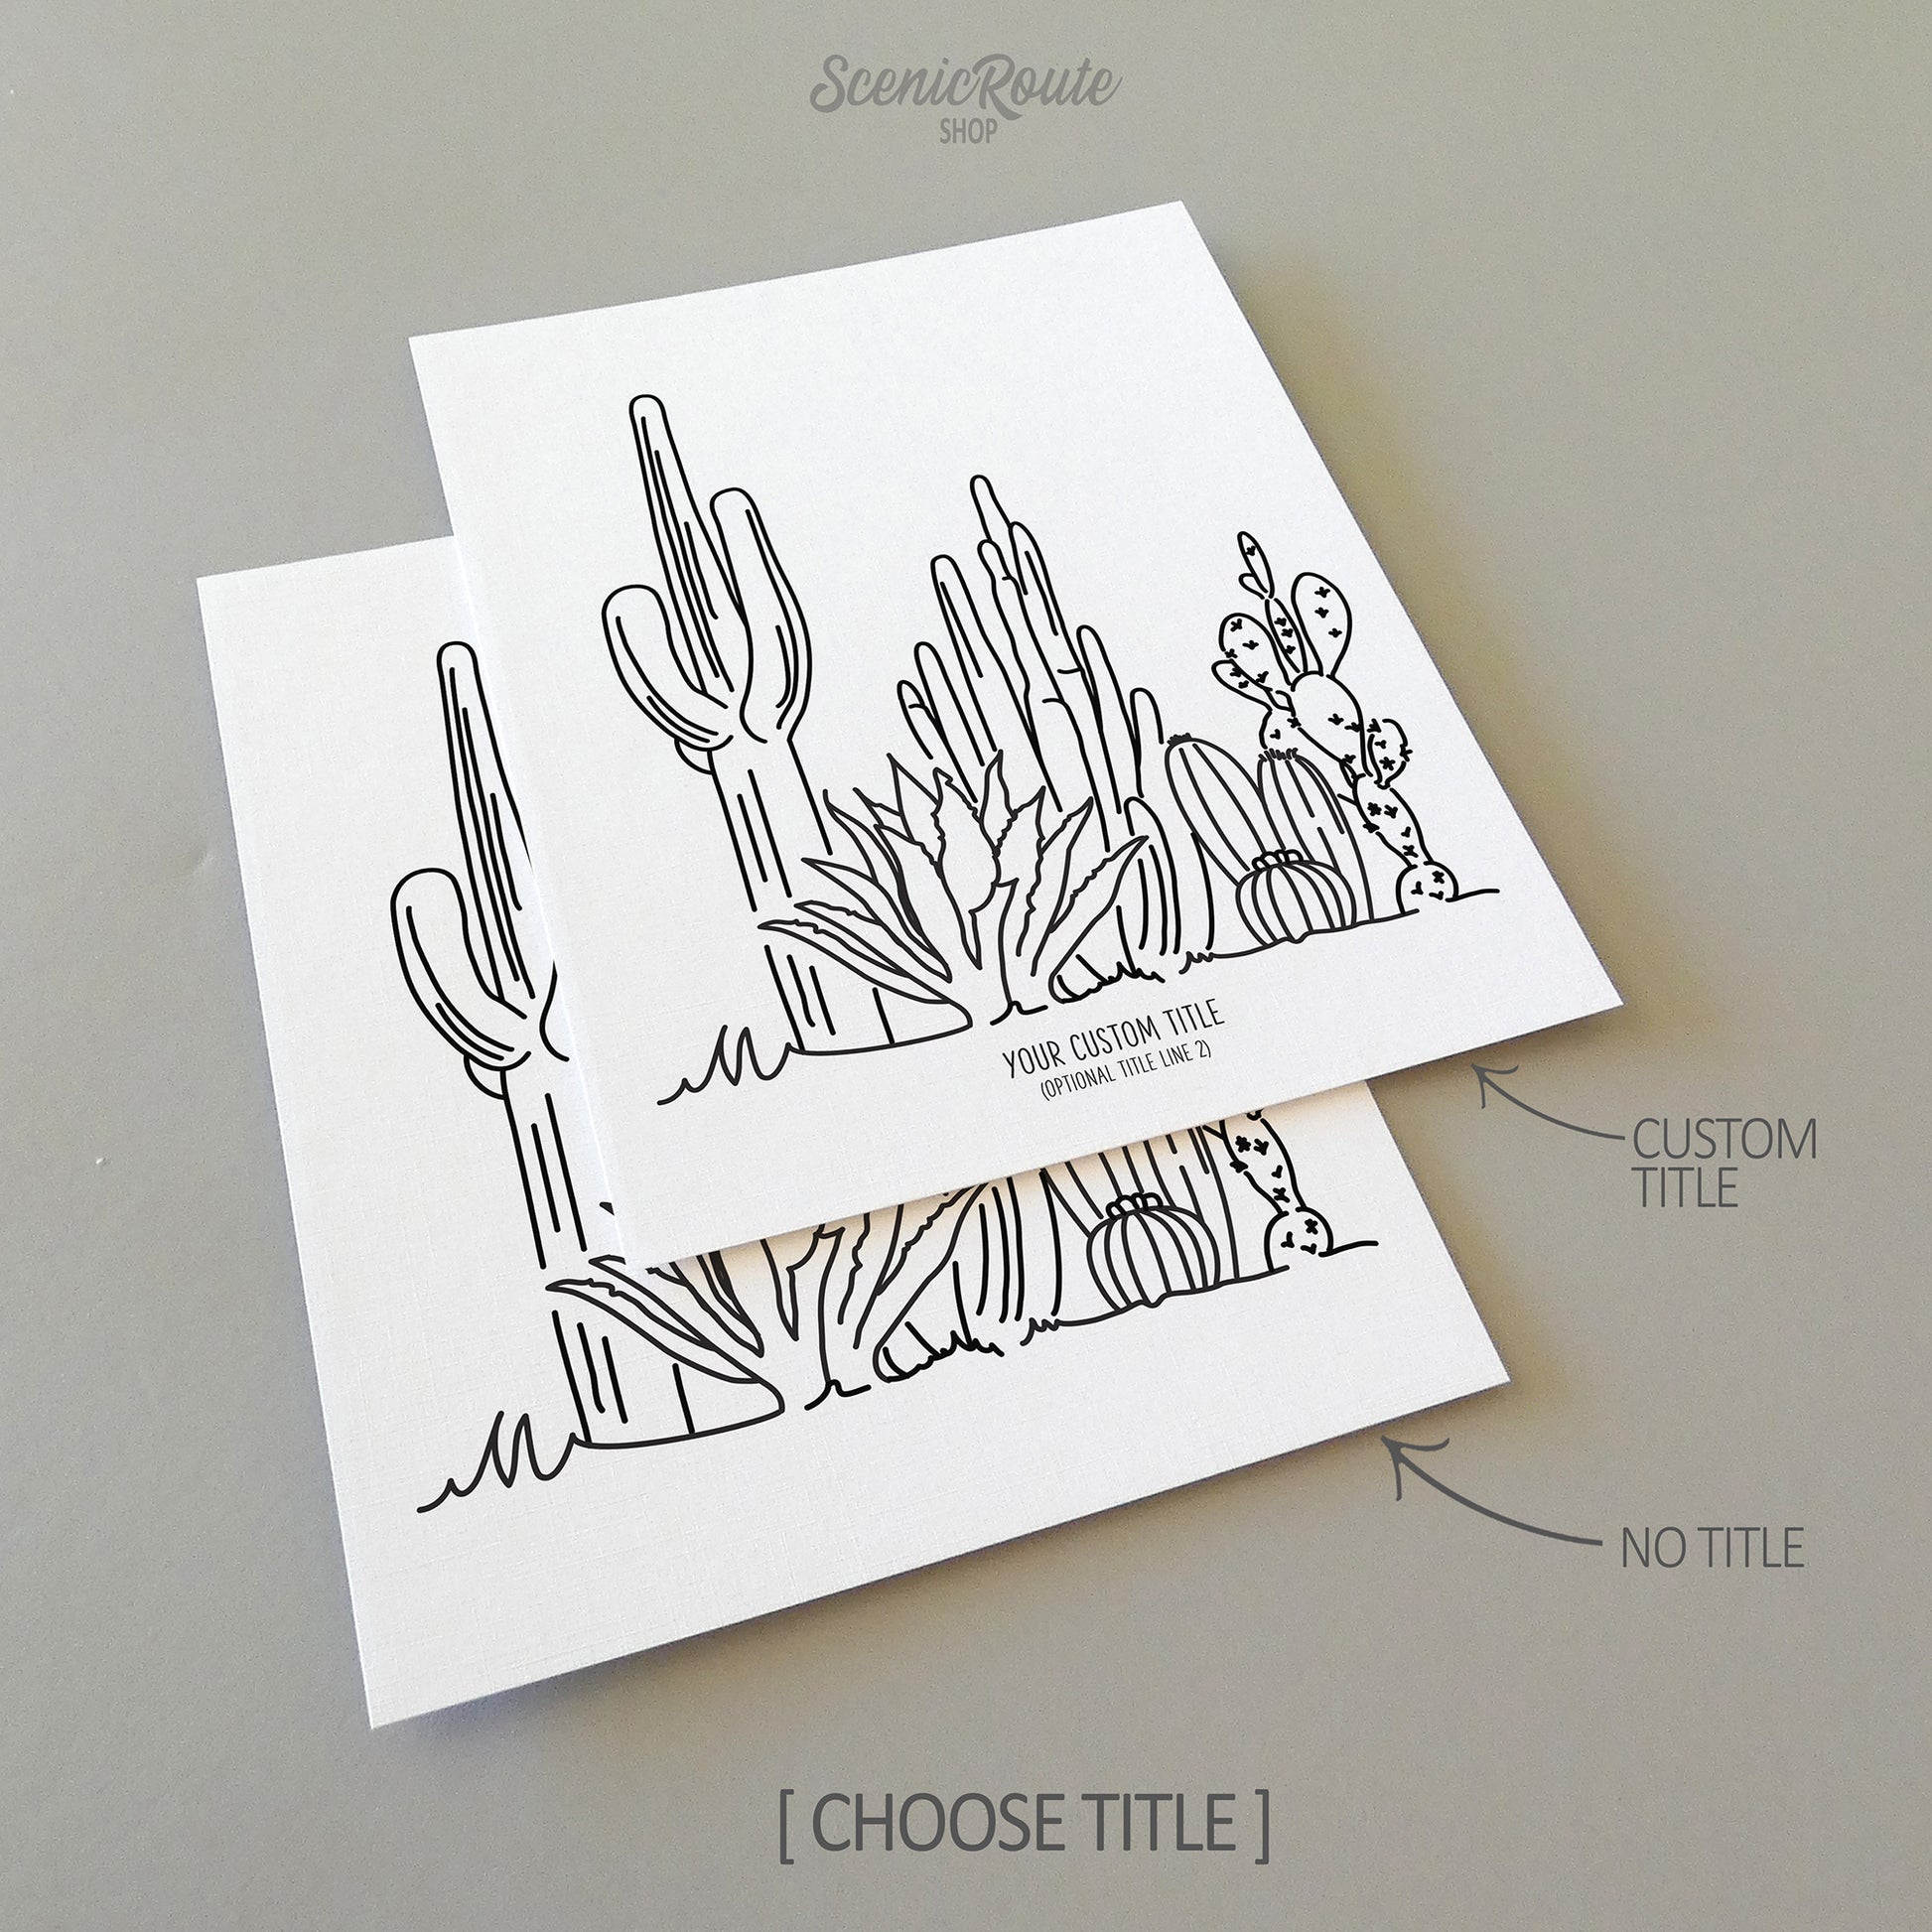 Two line art drawings of a Cactus garden with Saguaro, Agave, Organ Pipe, Torch, and Prickly Pear Cactus on white linen paper with a gray background.  The pieces are shown with “No Title” and “Custom Title” options for the available art print options.